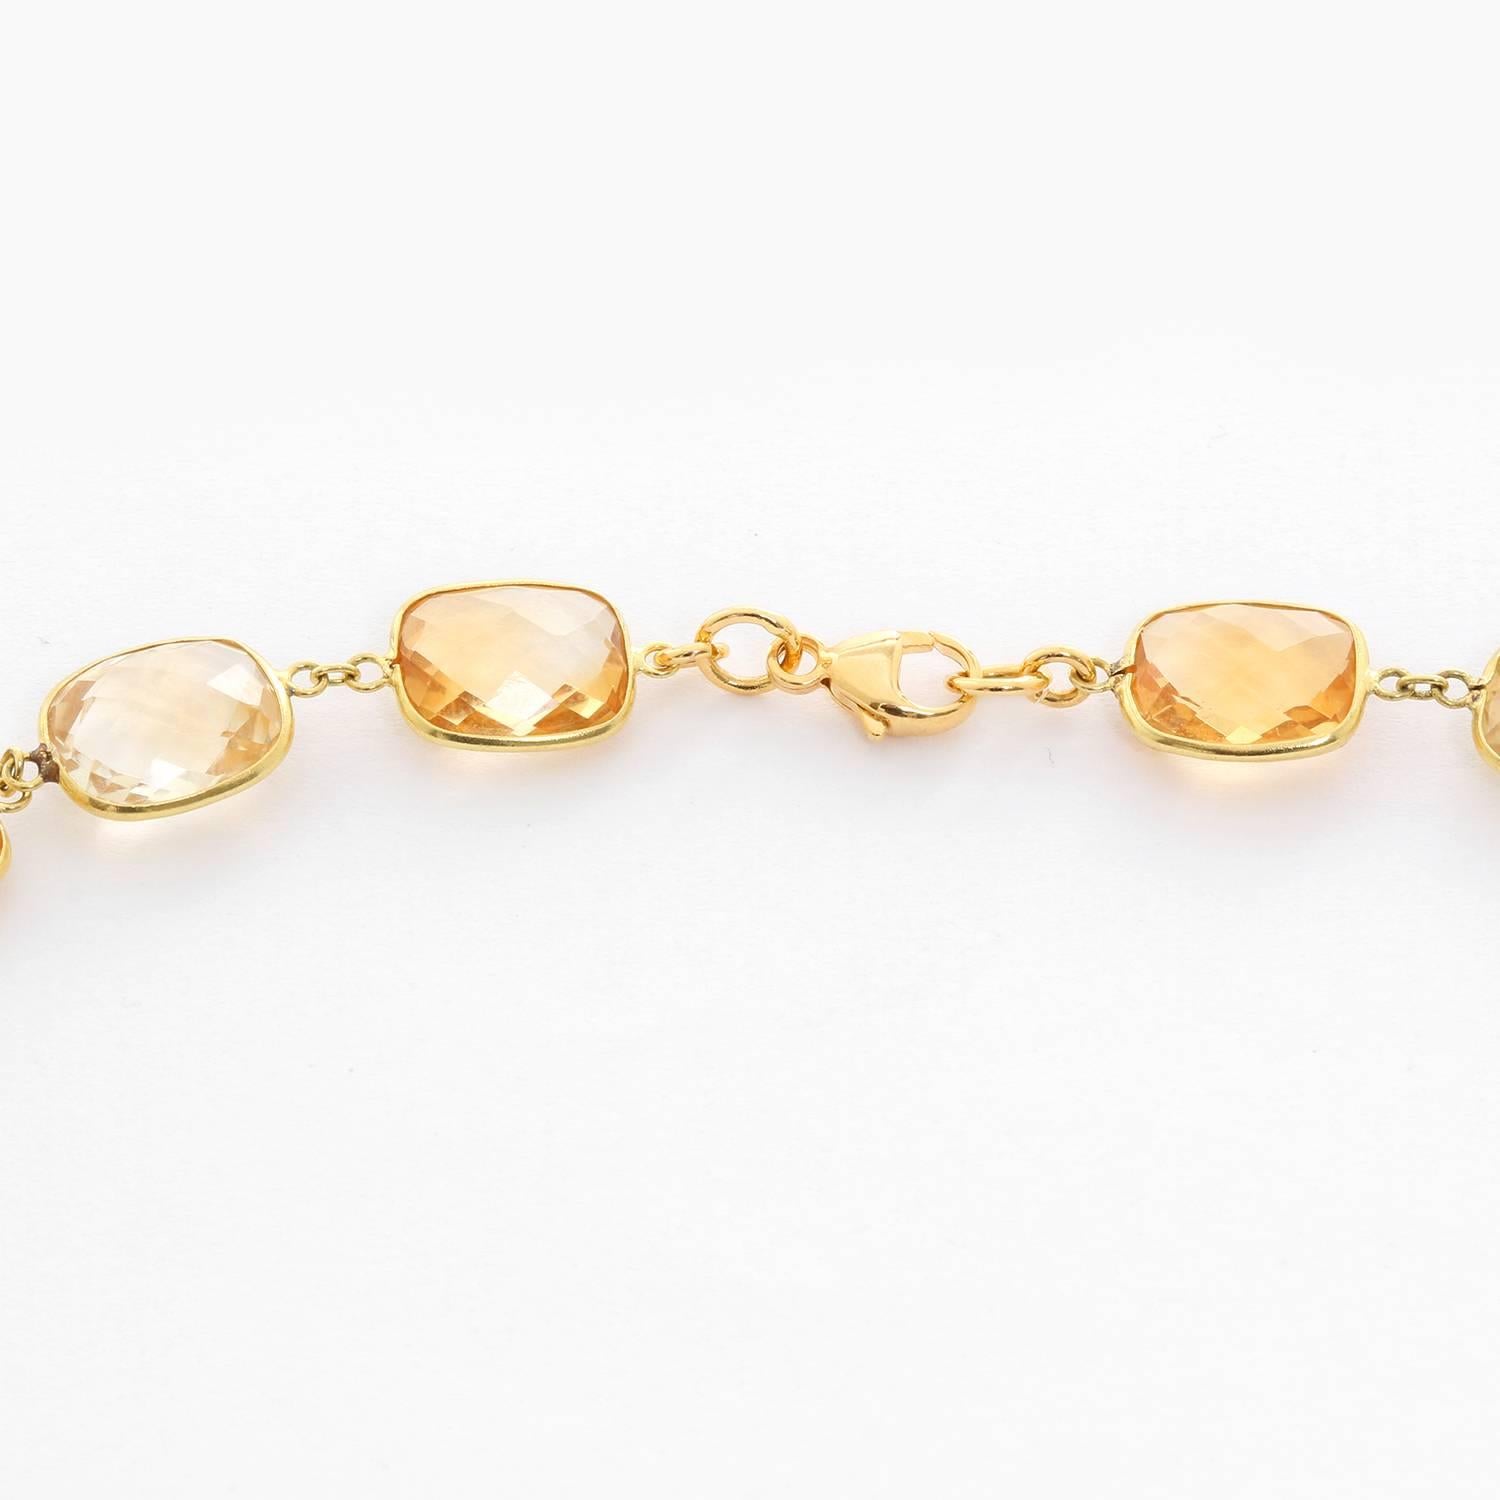 14K Yellow Gold Citrine by the Yard Necklace - . Beautiful 14K Yellow Gold with oval Citrine stones. Length 20 inches. Total weight 20.8 grams.